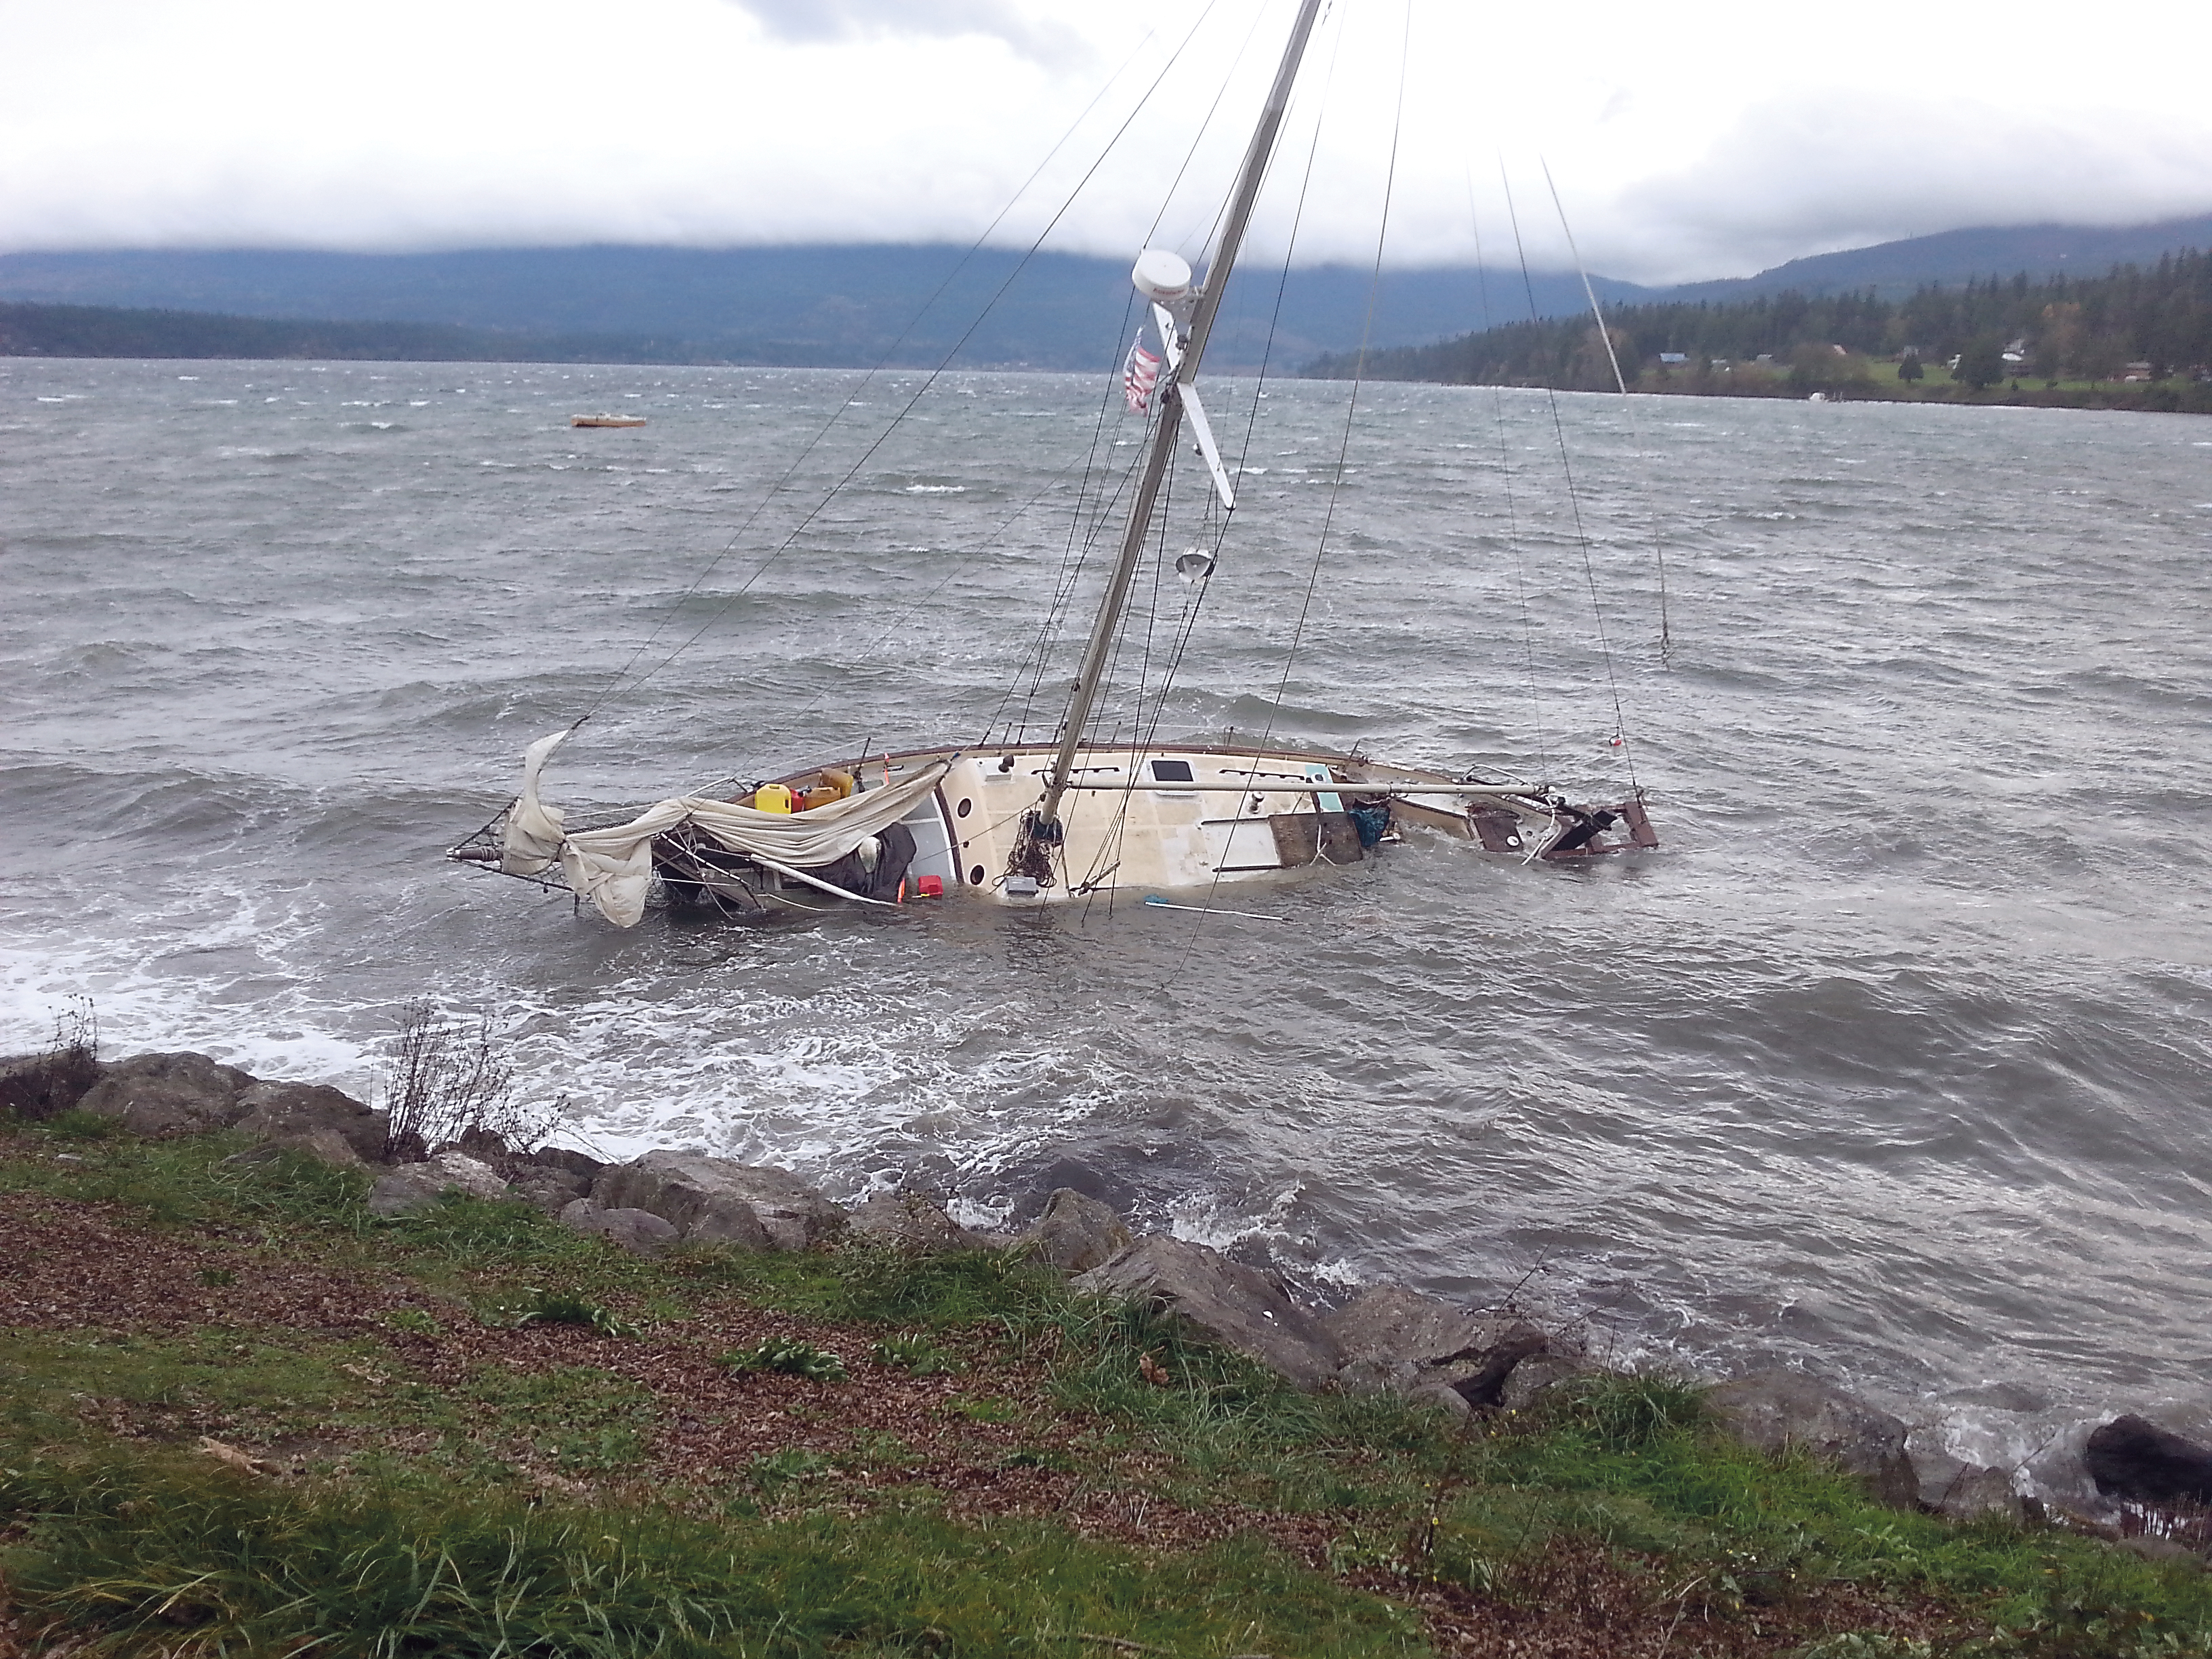 This sailboat anchored in Sequim Bay was beached by high winds Thursday morning